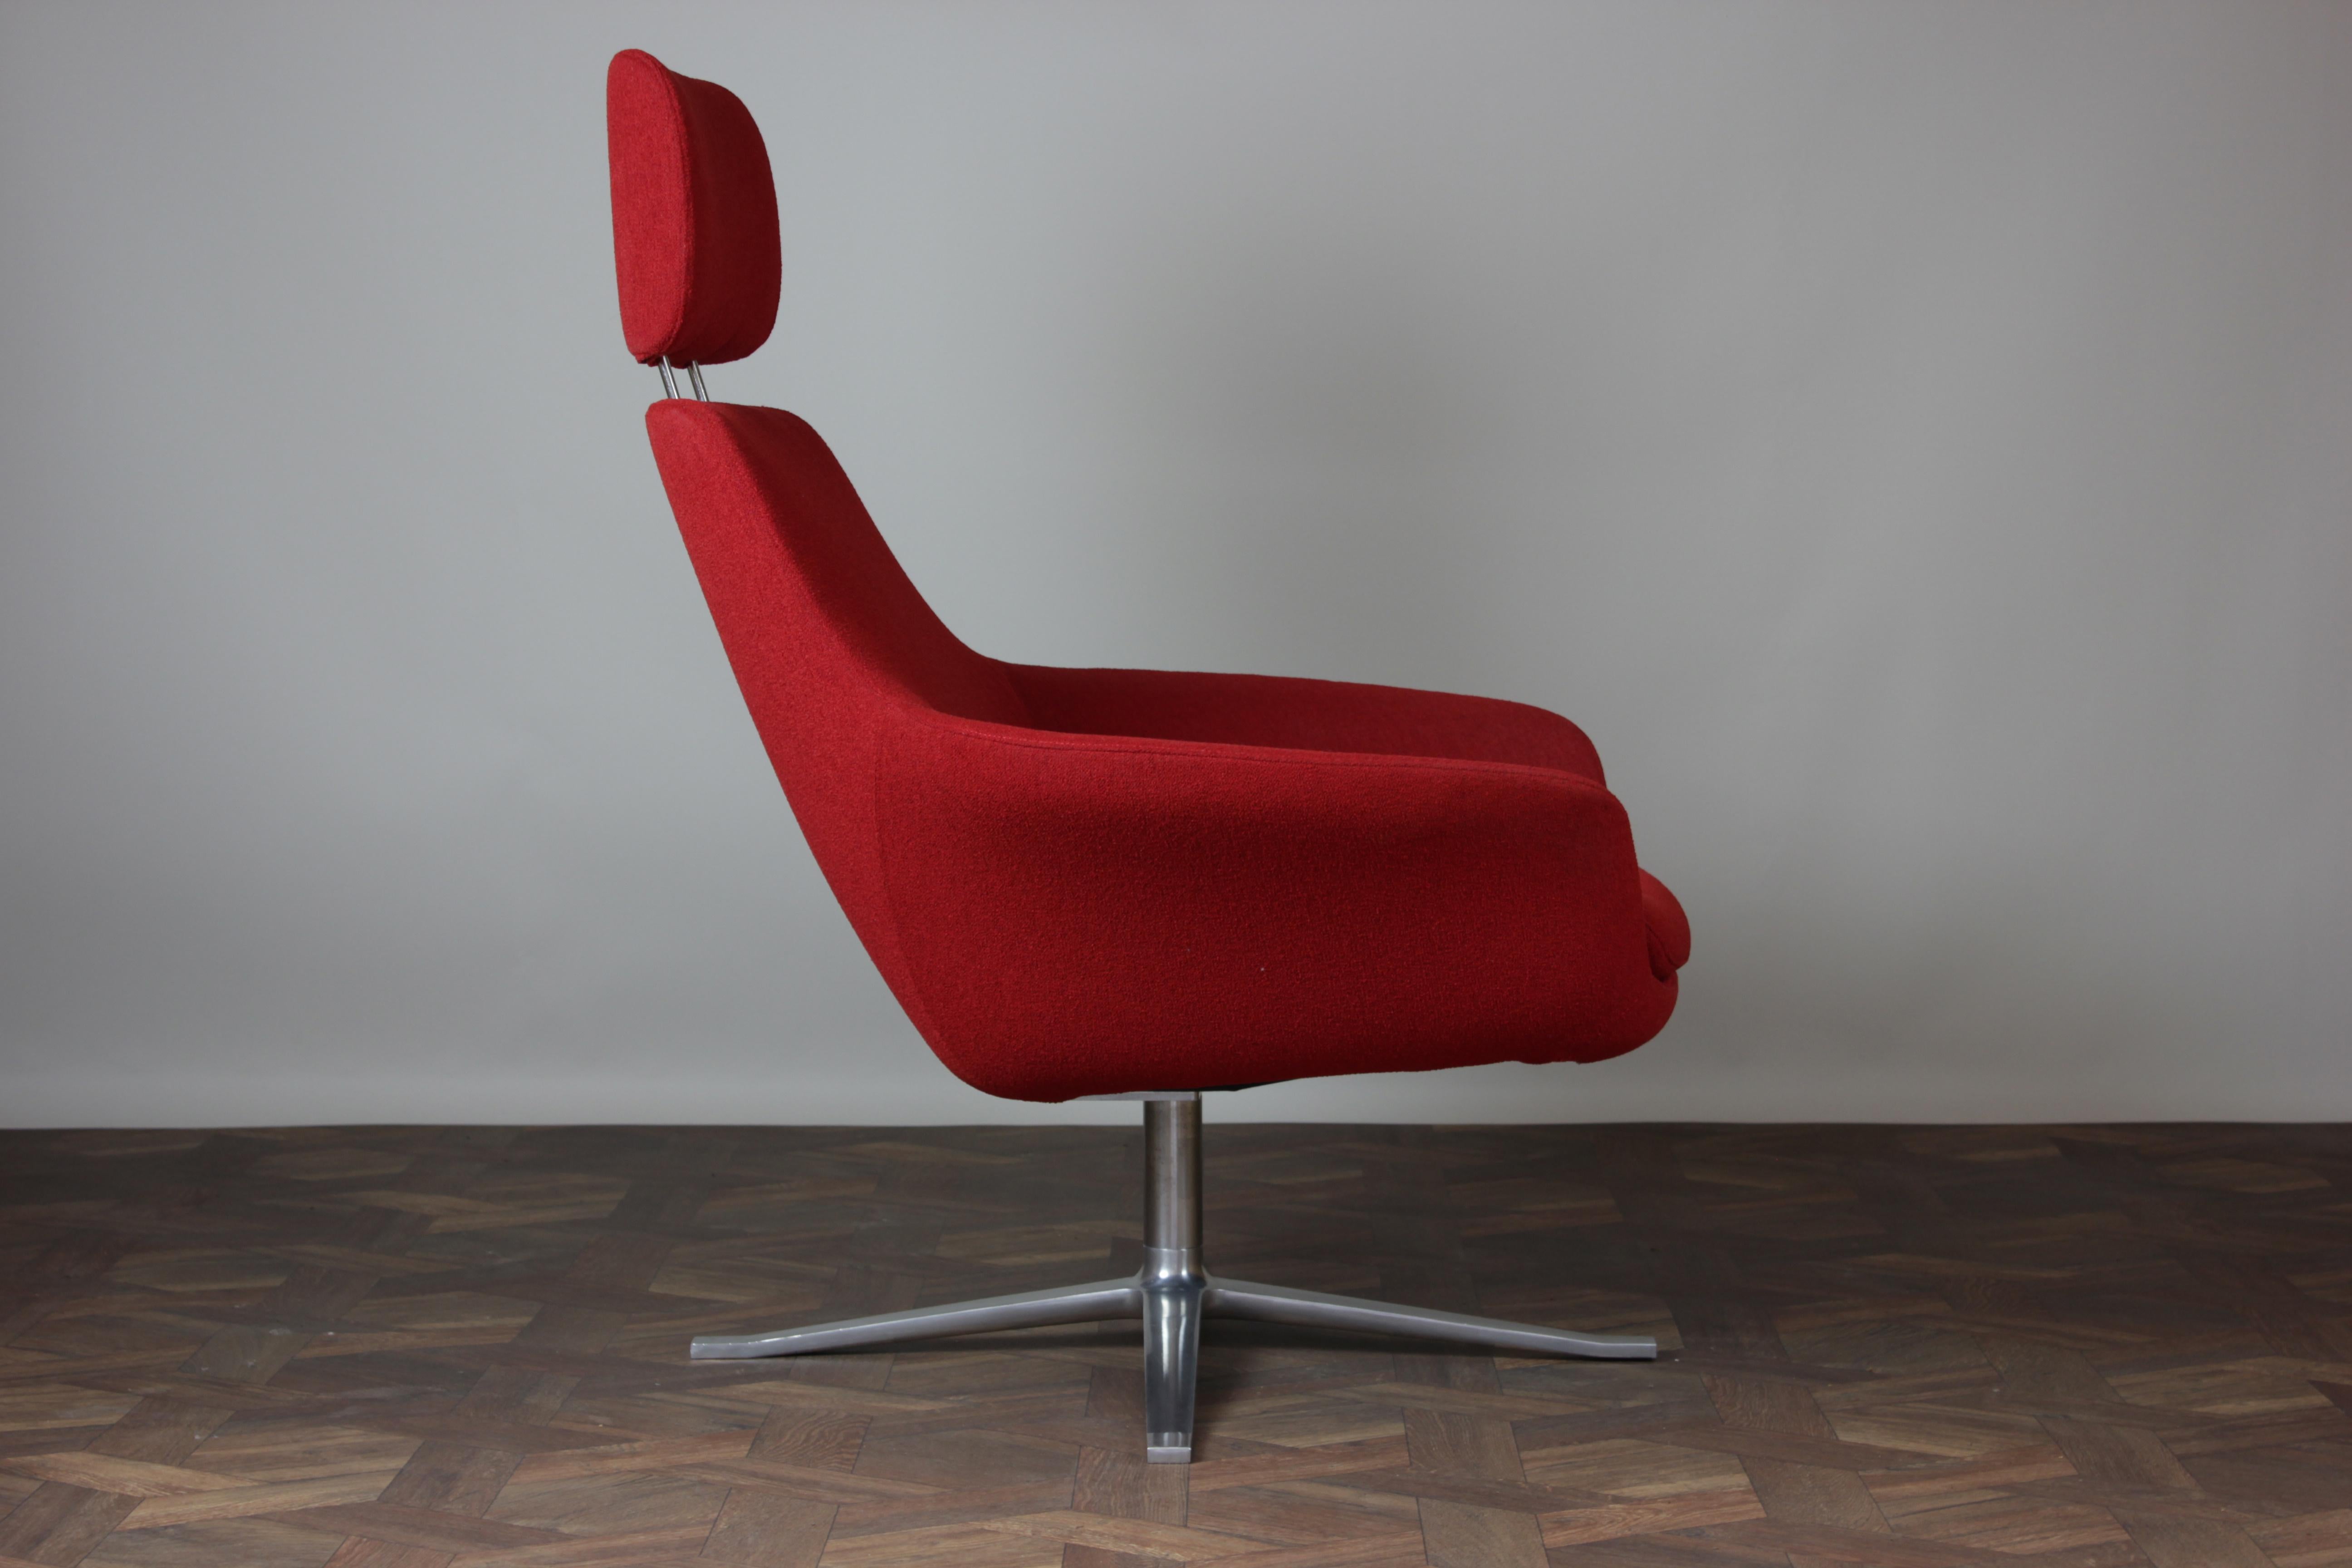 English Pair of Modern Oscar Red Armchairs by Pearson Lloyd for Walter Knoll